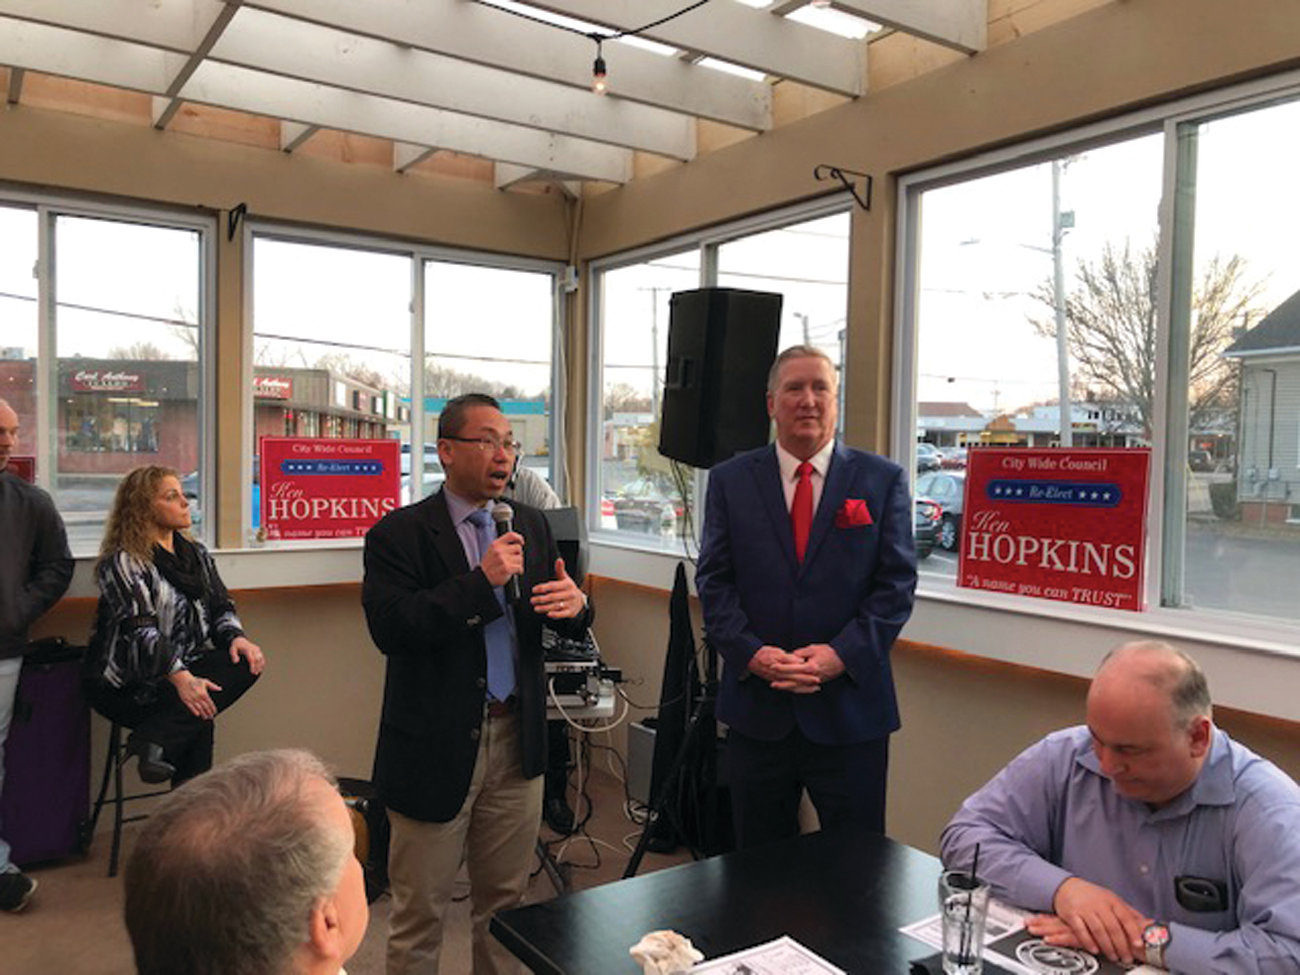 Mayor Allan Fung speaks during a 2019 fundraiser for Citywide Councilman Ken Hopkins. Fung on Monday endorsed Hopkins' bid to succeed him as mayor.